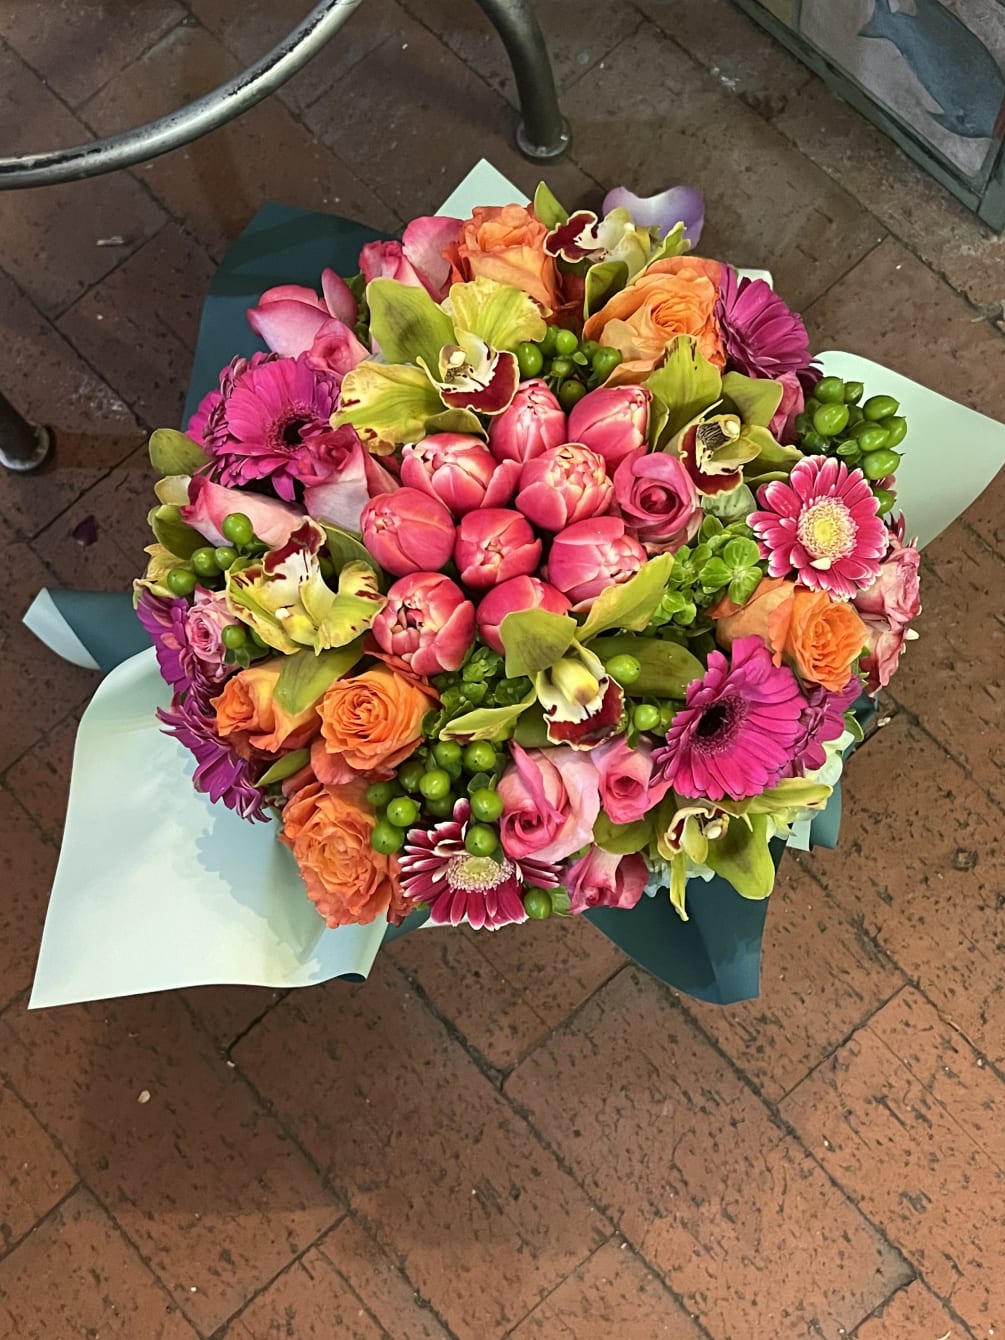 A flavorful explosion of color filled with bright beautiful blooms perfect to